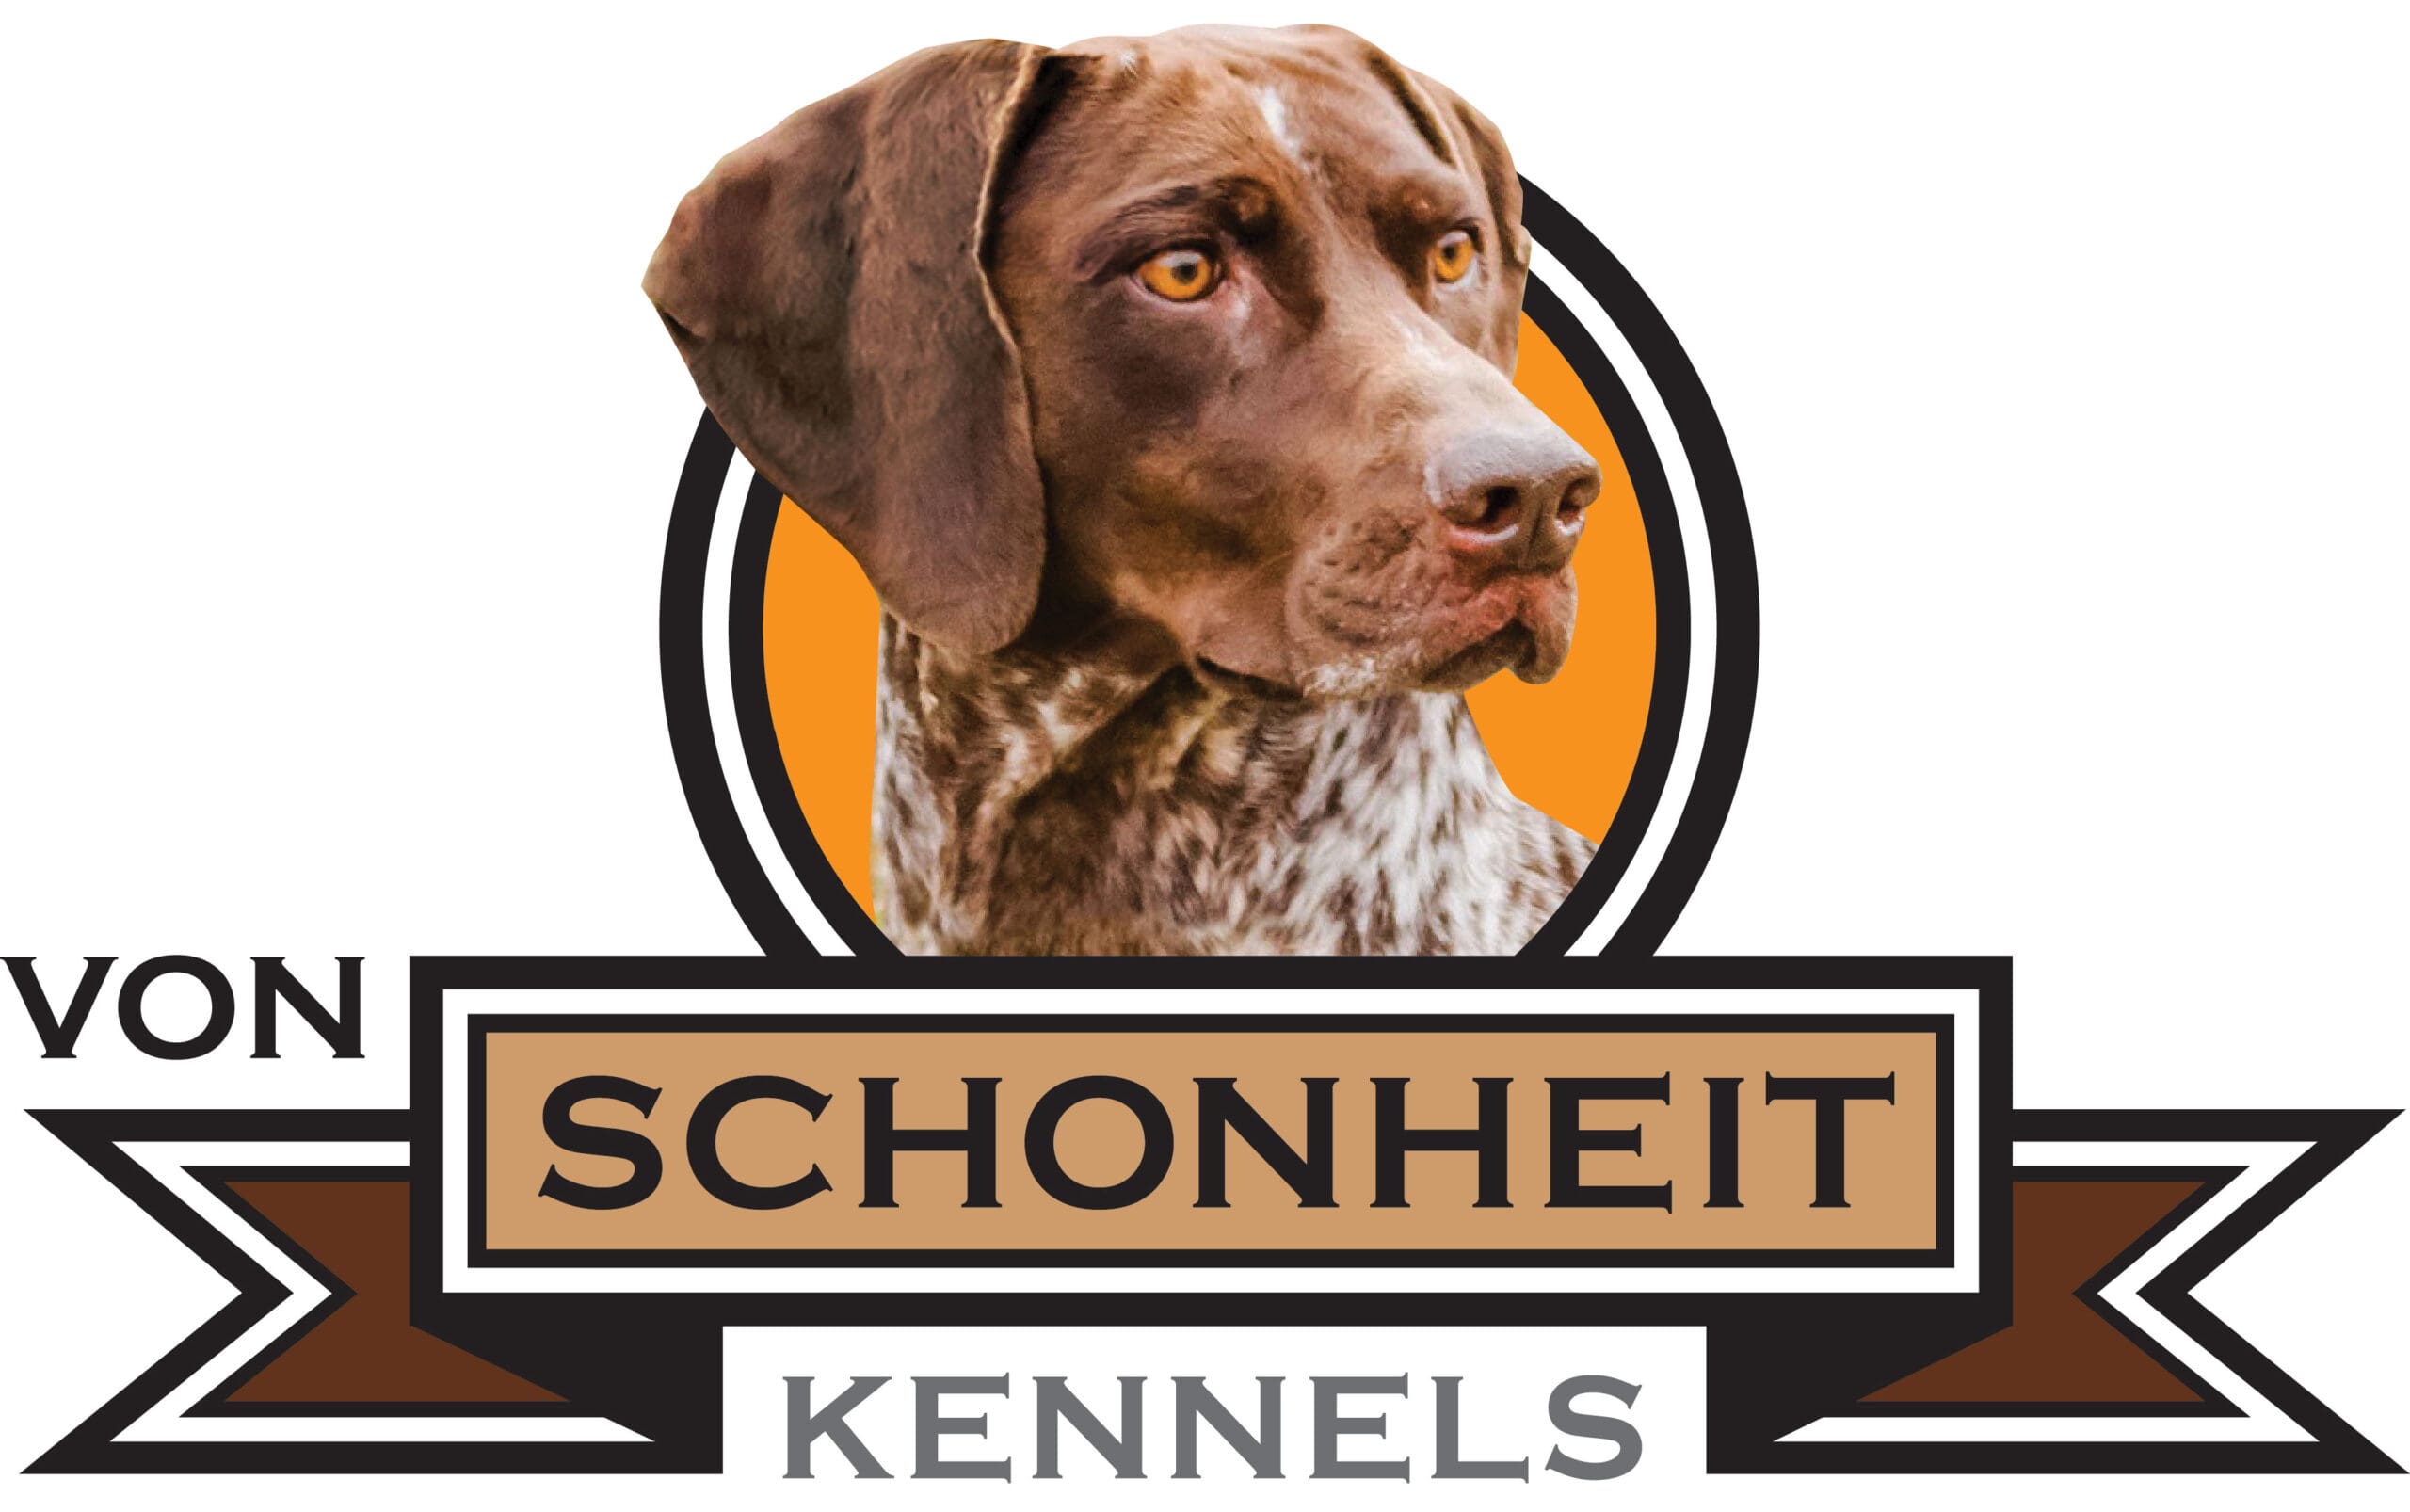 A brown and white dog is sitting in front of the german shorthaired pointer logo.